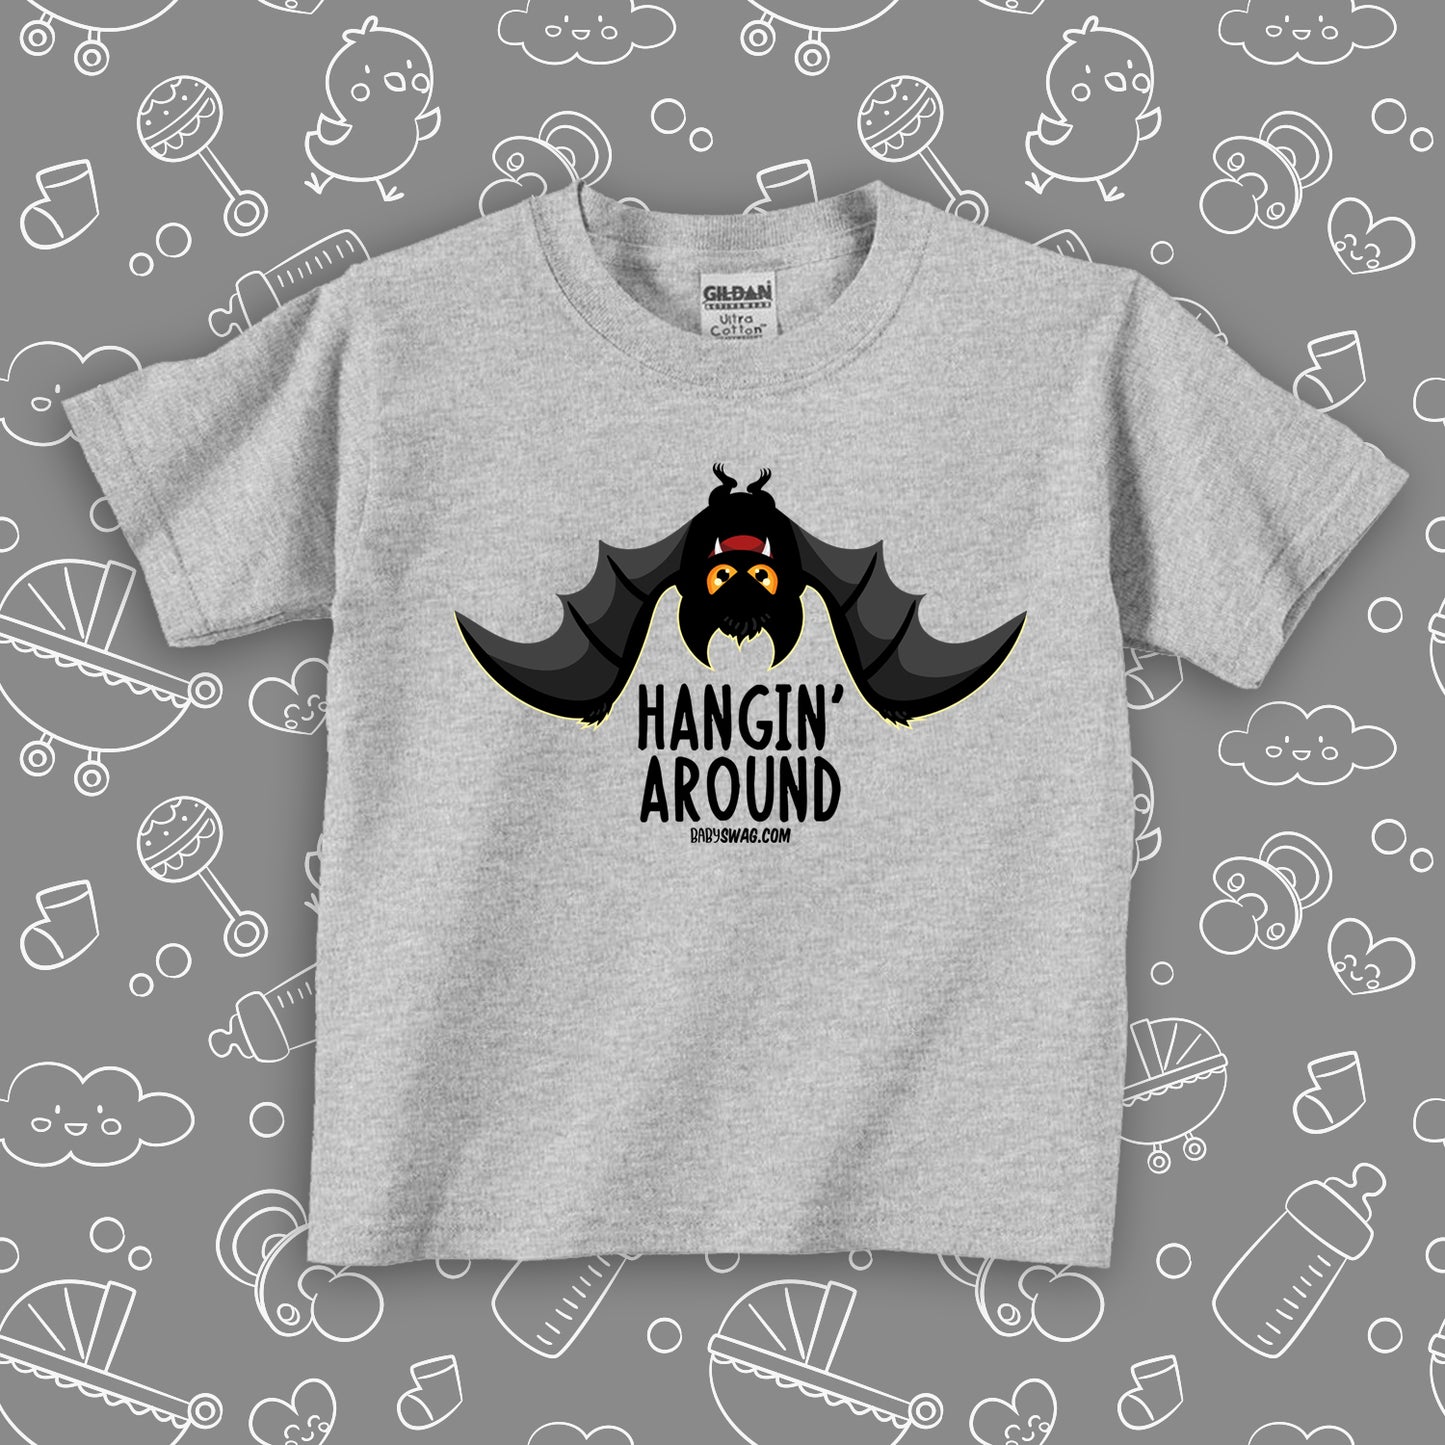 Toddler graphic tee with saying "Hangin' Around" in grey 